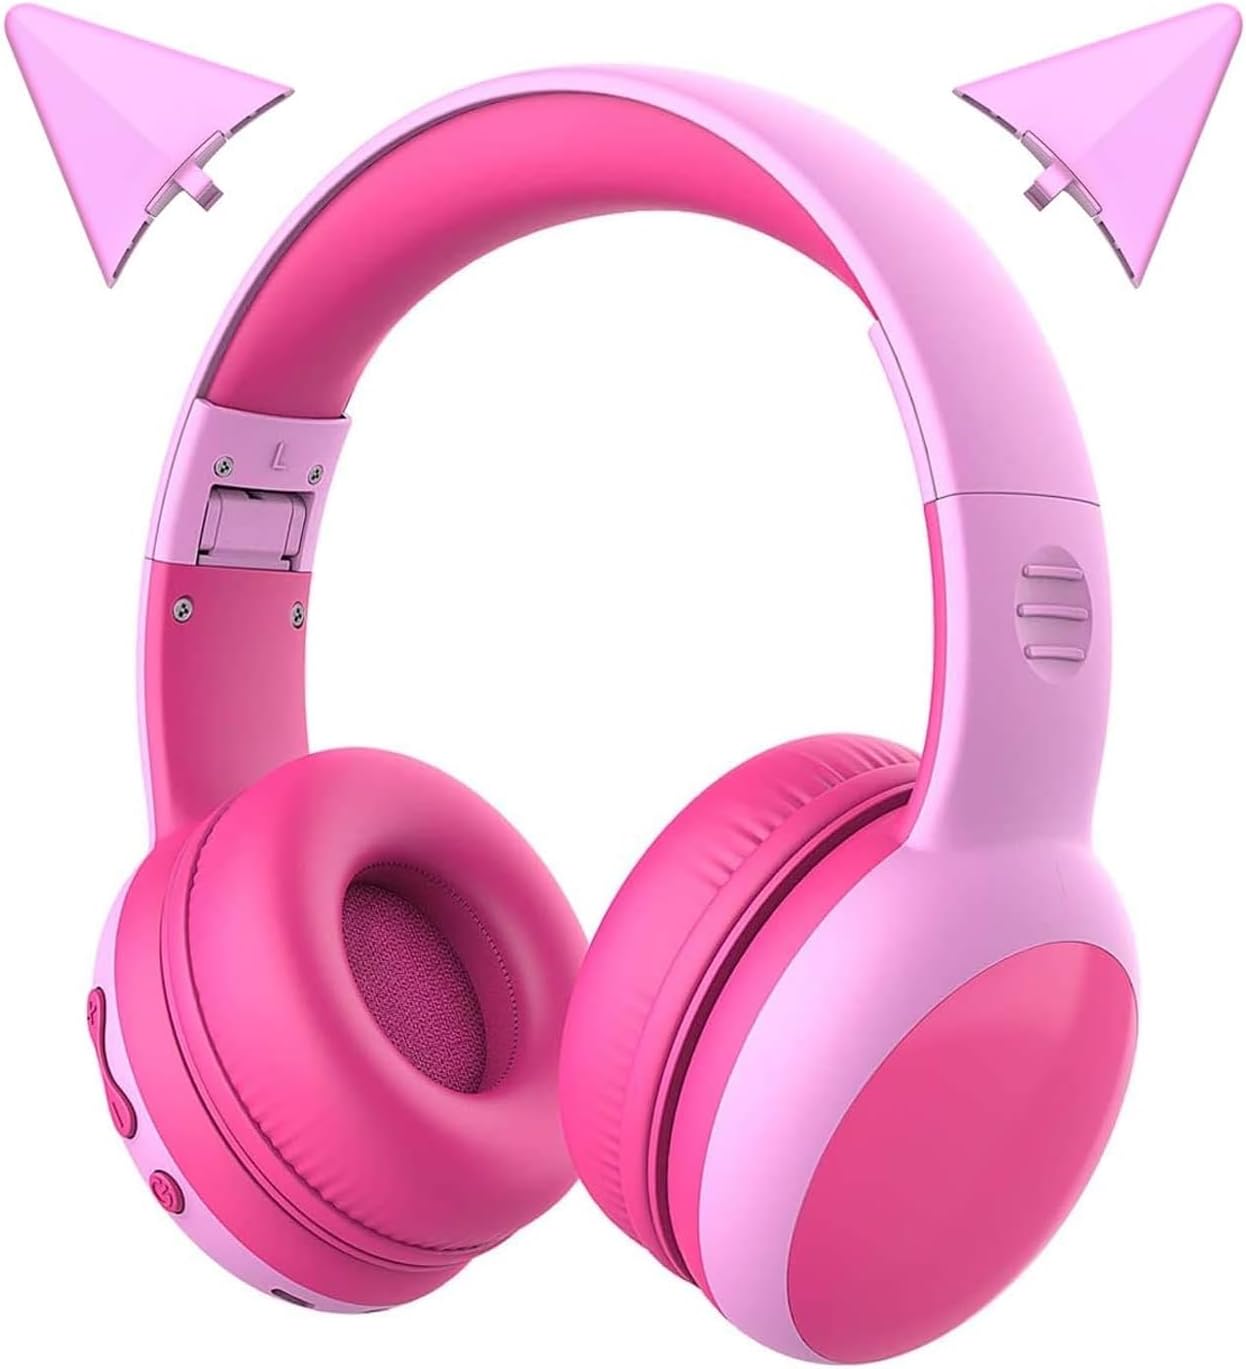 Bluetooth Kids Headphones with Microphone,Children's Wireless Headsets with 85dB Volume Limited Hearing Protection,Stereo Over-Ear Headphones for Boys and Girls (Pink)